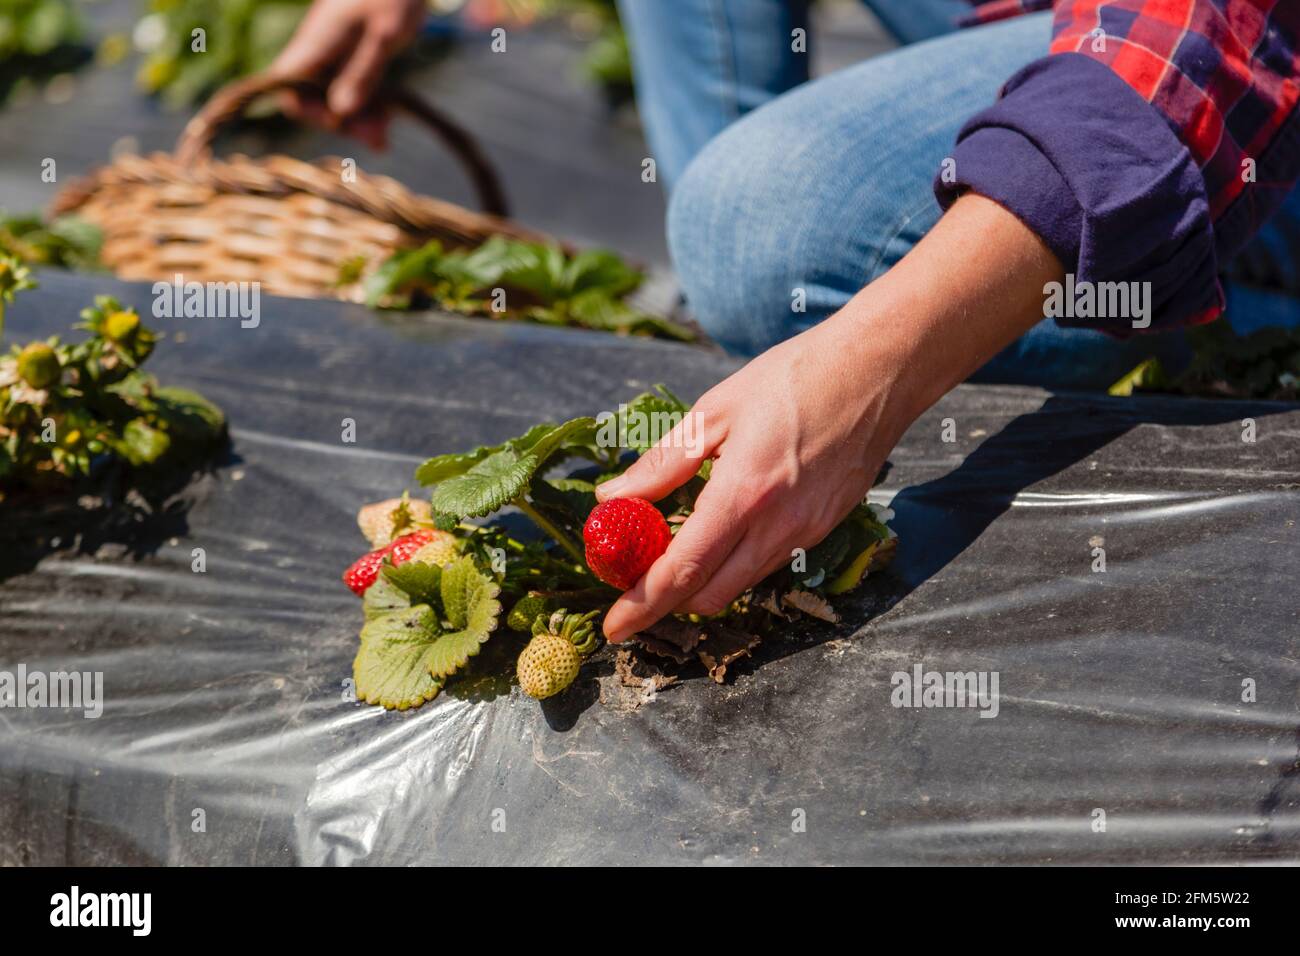 Natural woman in red shirt picks strawberries on strawberry plantation; concept: natural lifestyle, organic agriculture Stock Photo